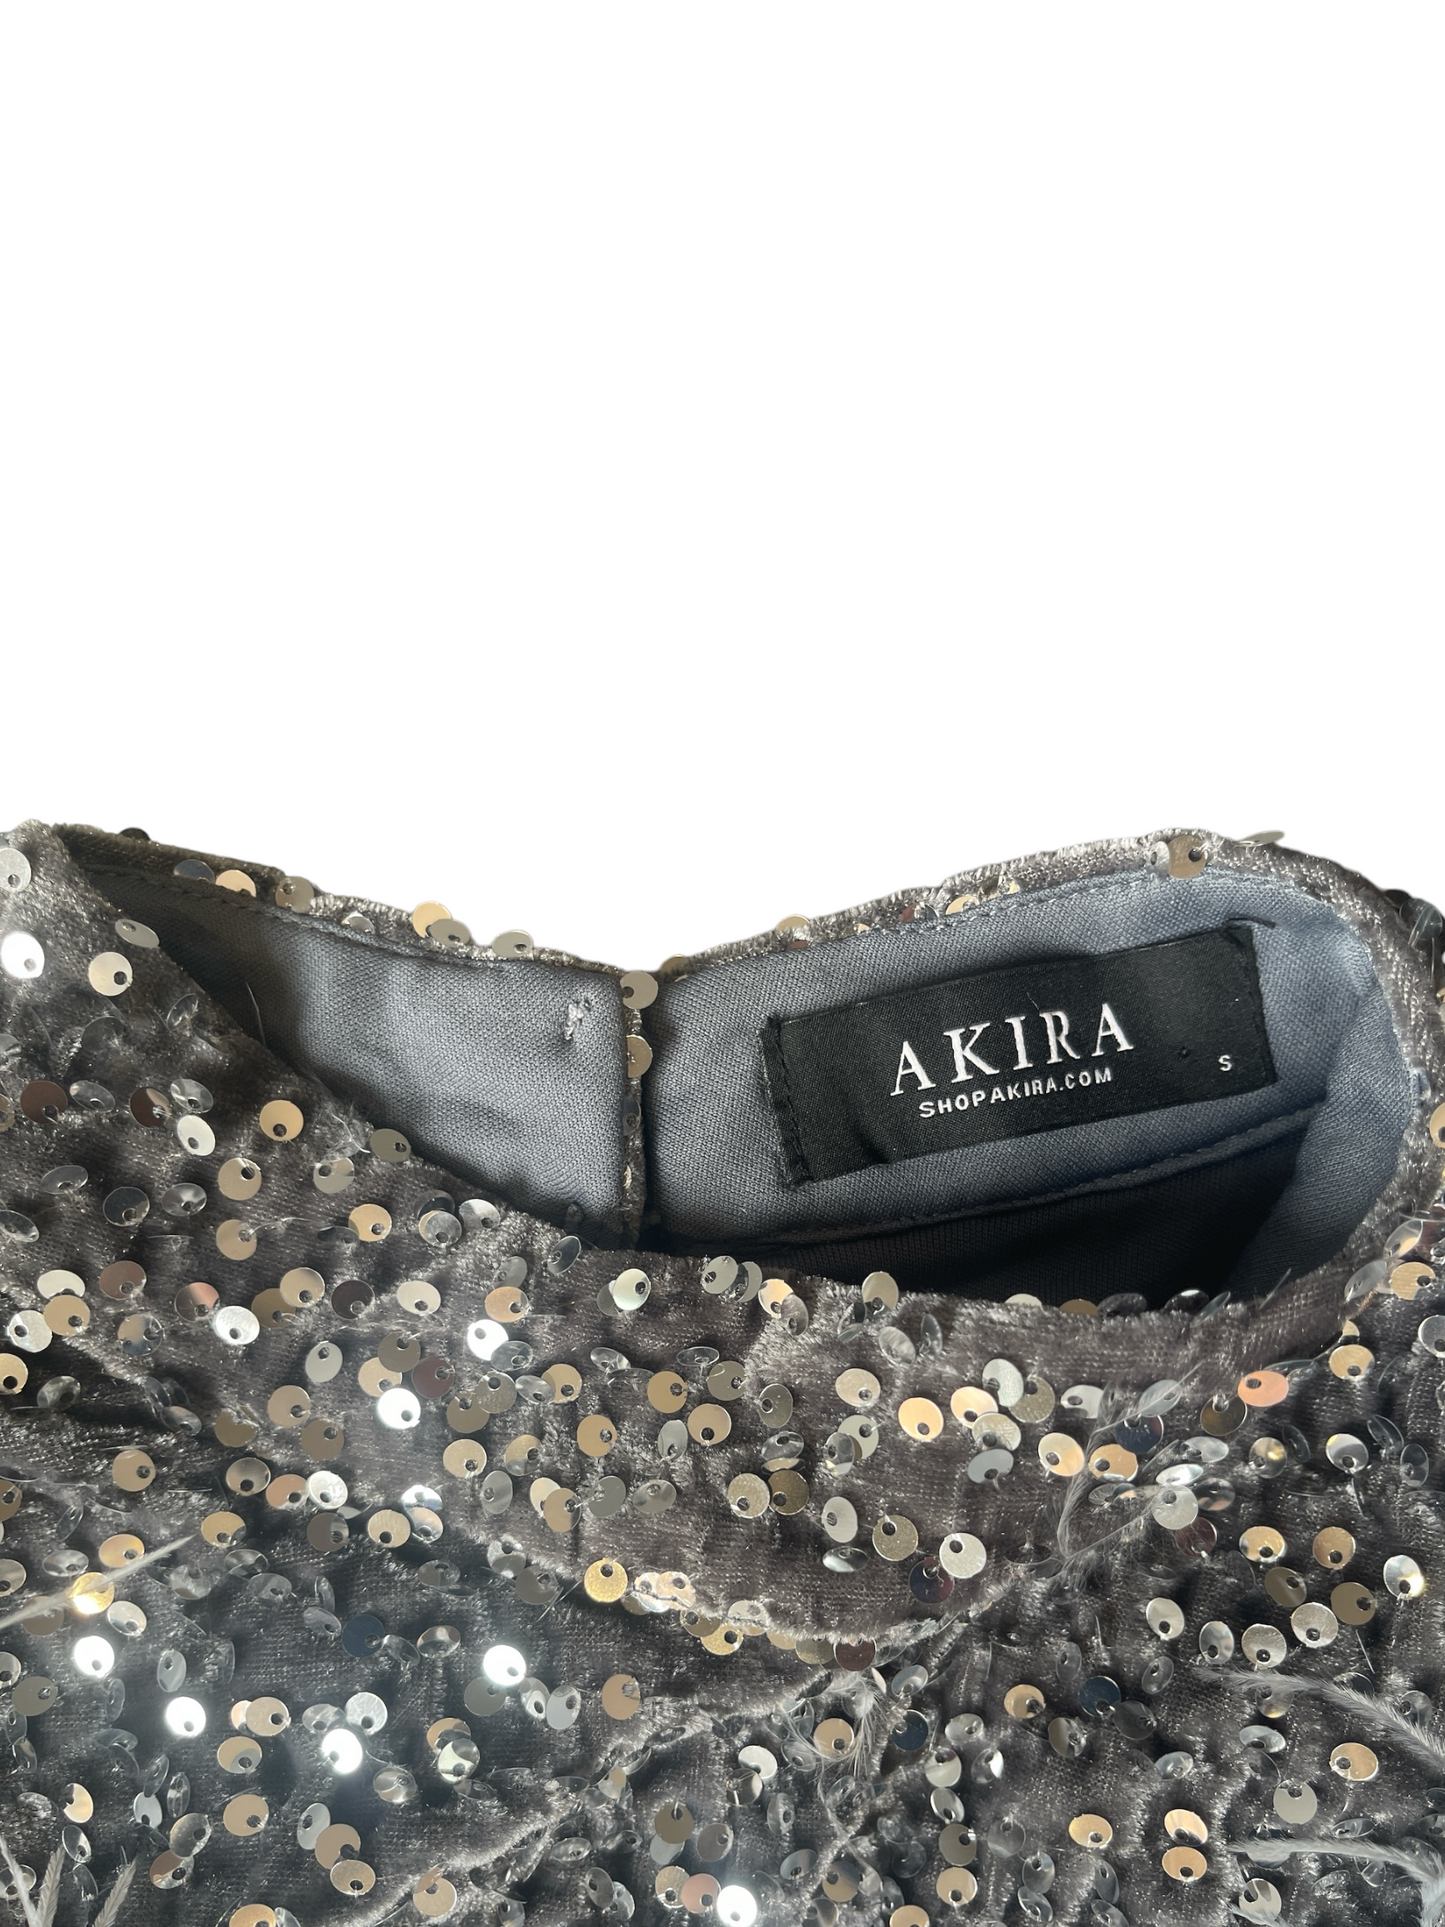 AKIRA Grey Sequin Dress with Feather Accent - Size S